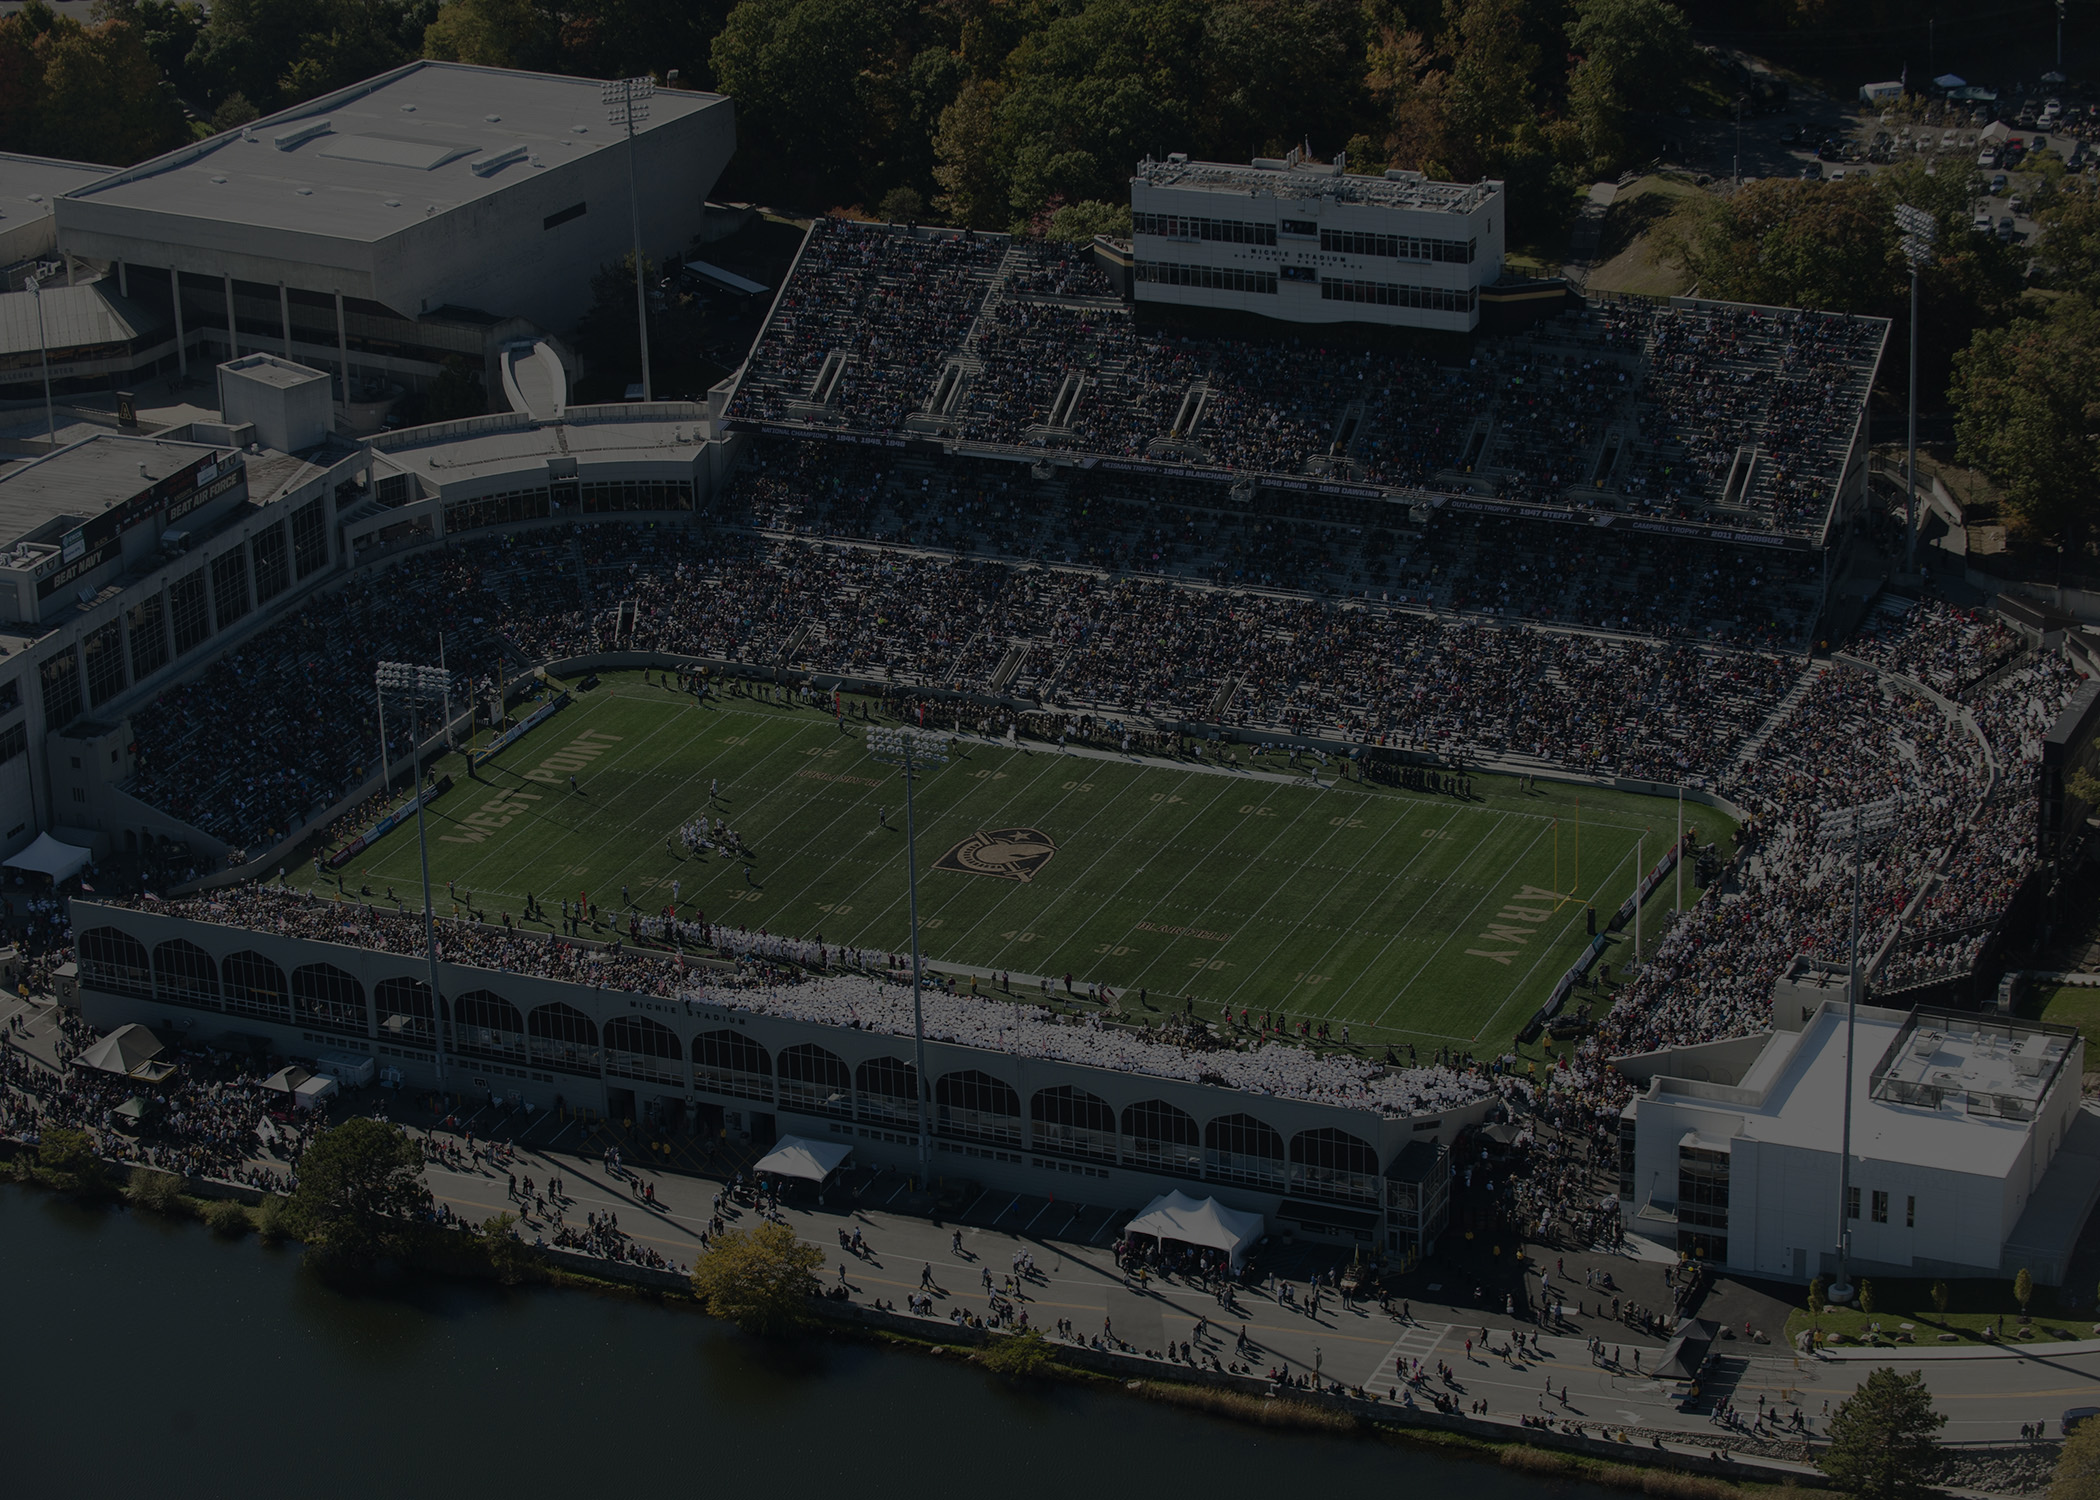 ARMY BLACK KNIGHTS ANNOUNCE 2022 SCHEDULE - Army West Point